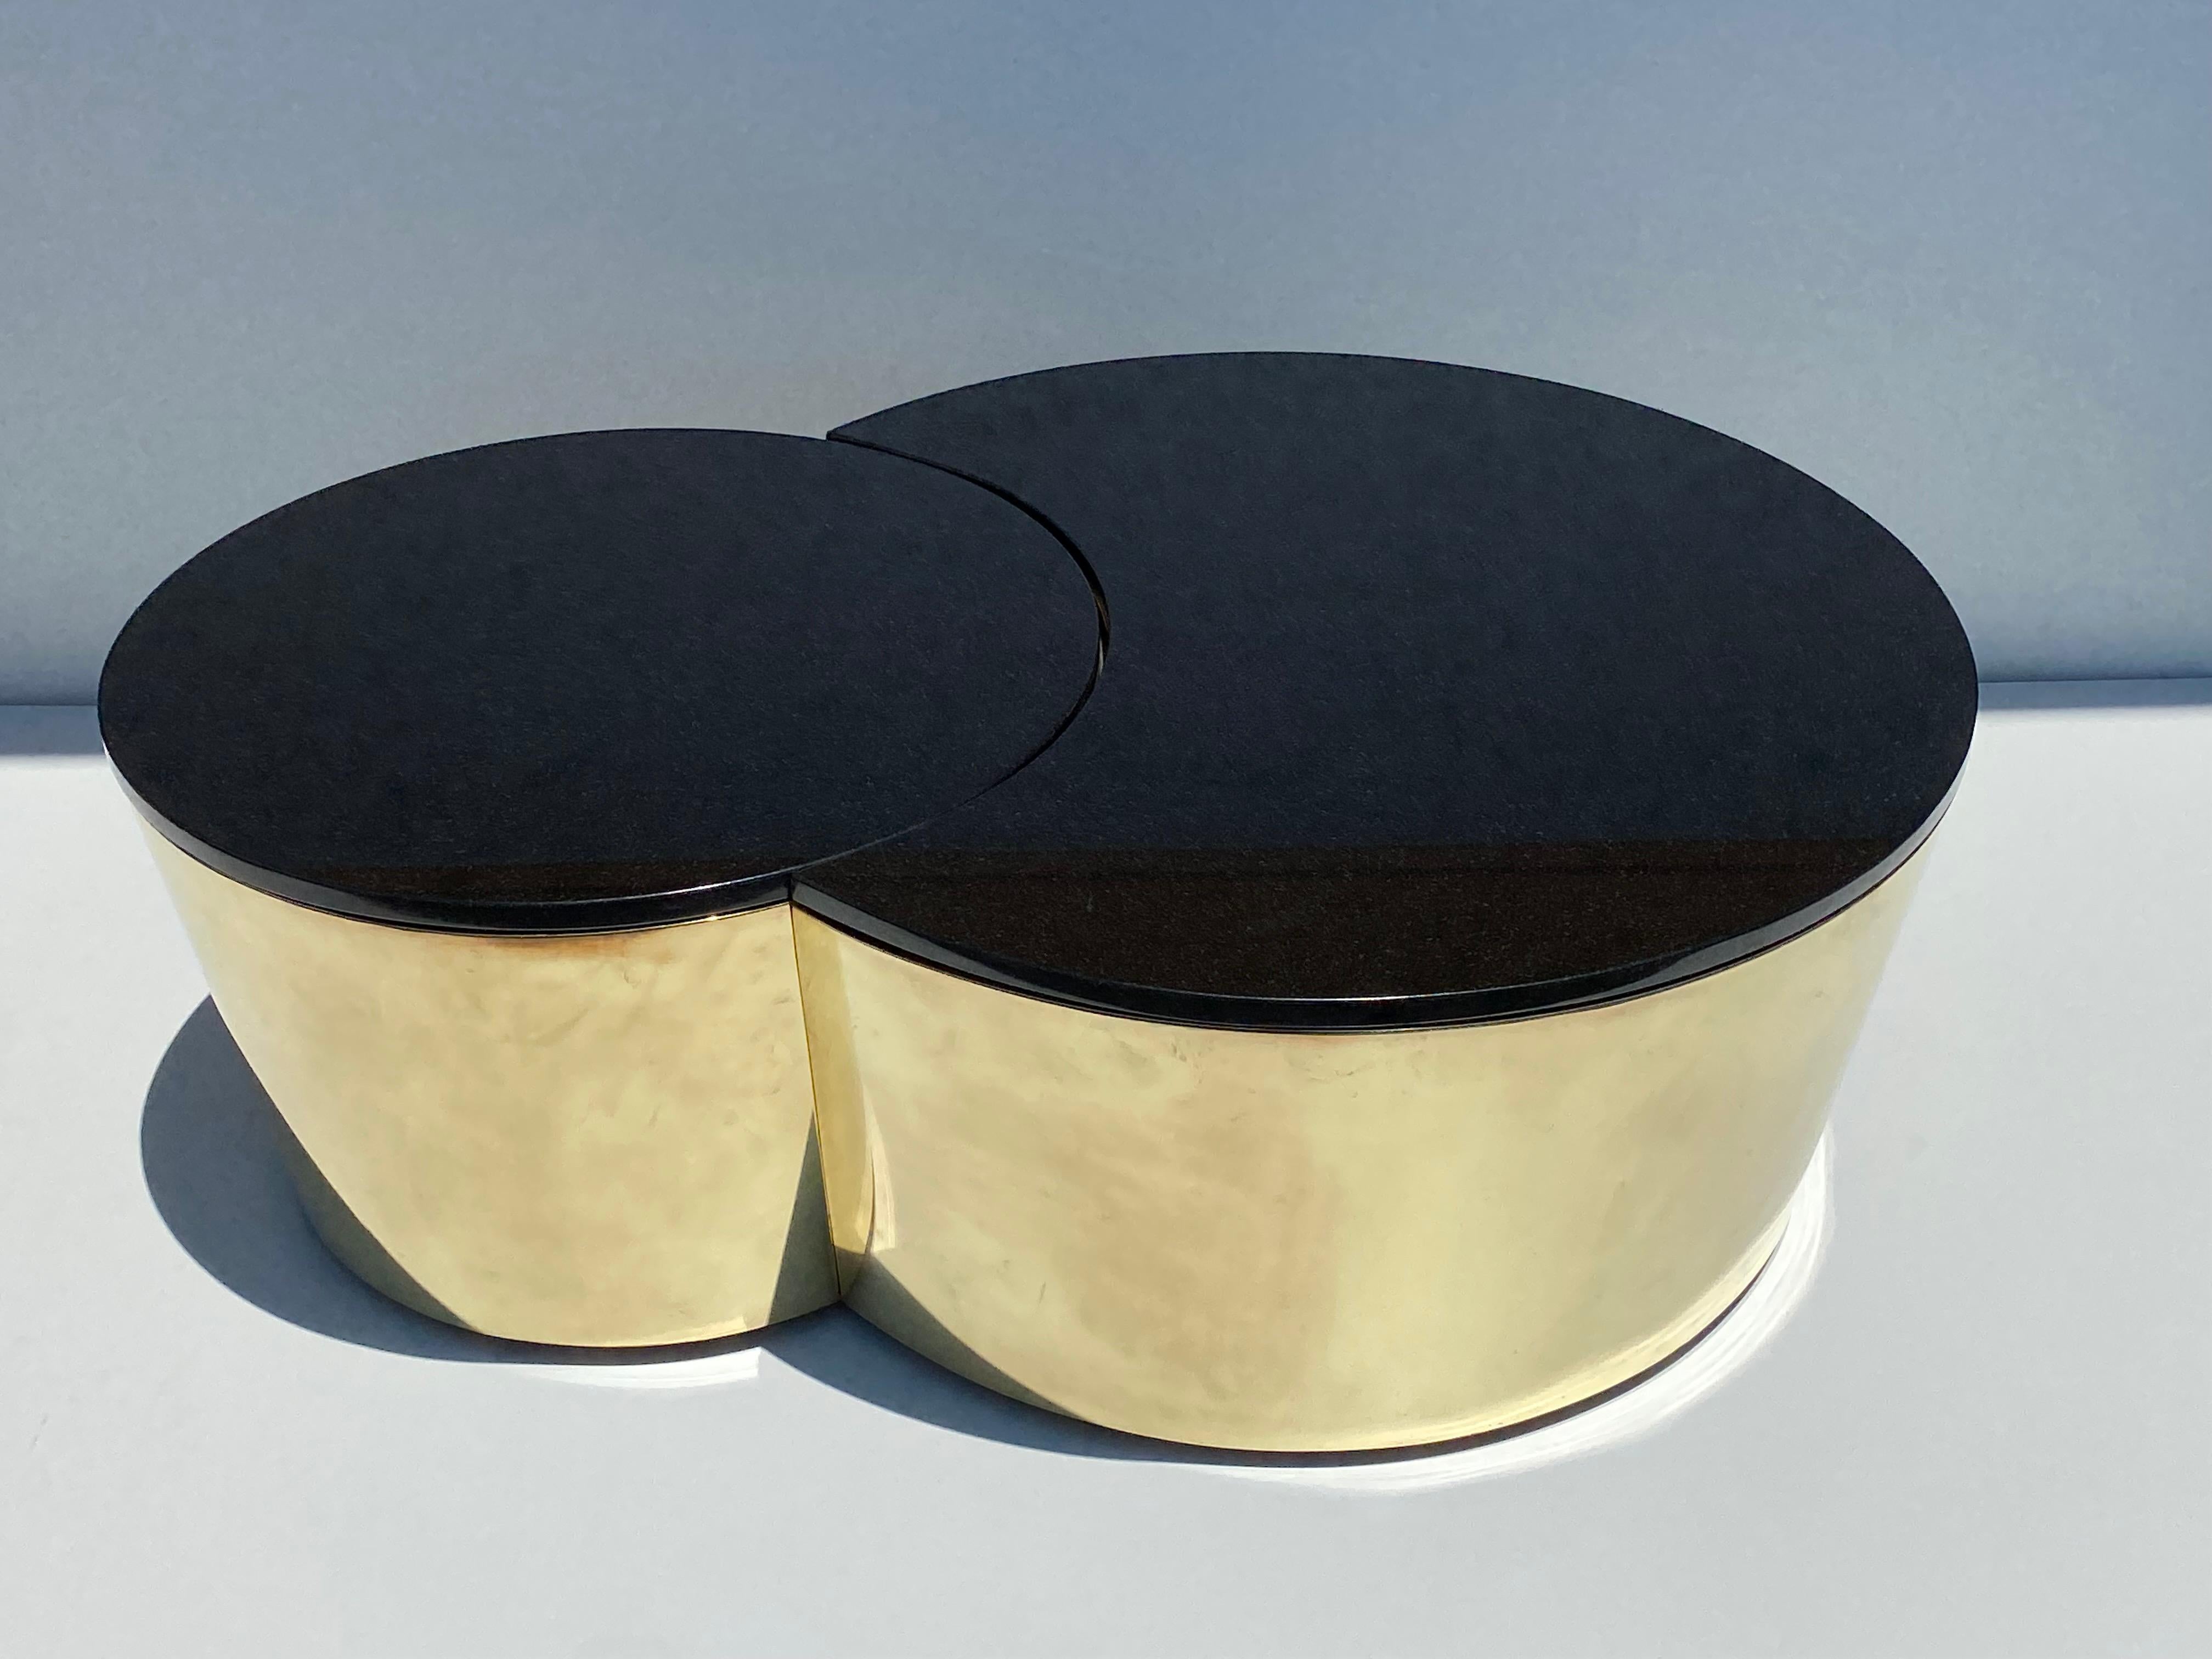 Set of interlocking brass and black granite coffee tables in the style of Karl Springer. Larger table is 27